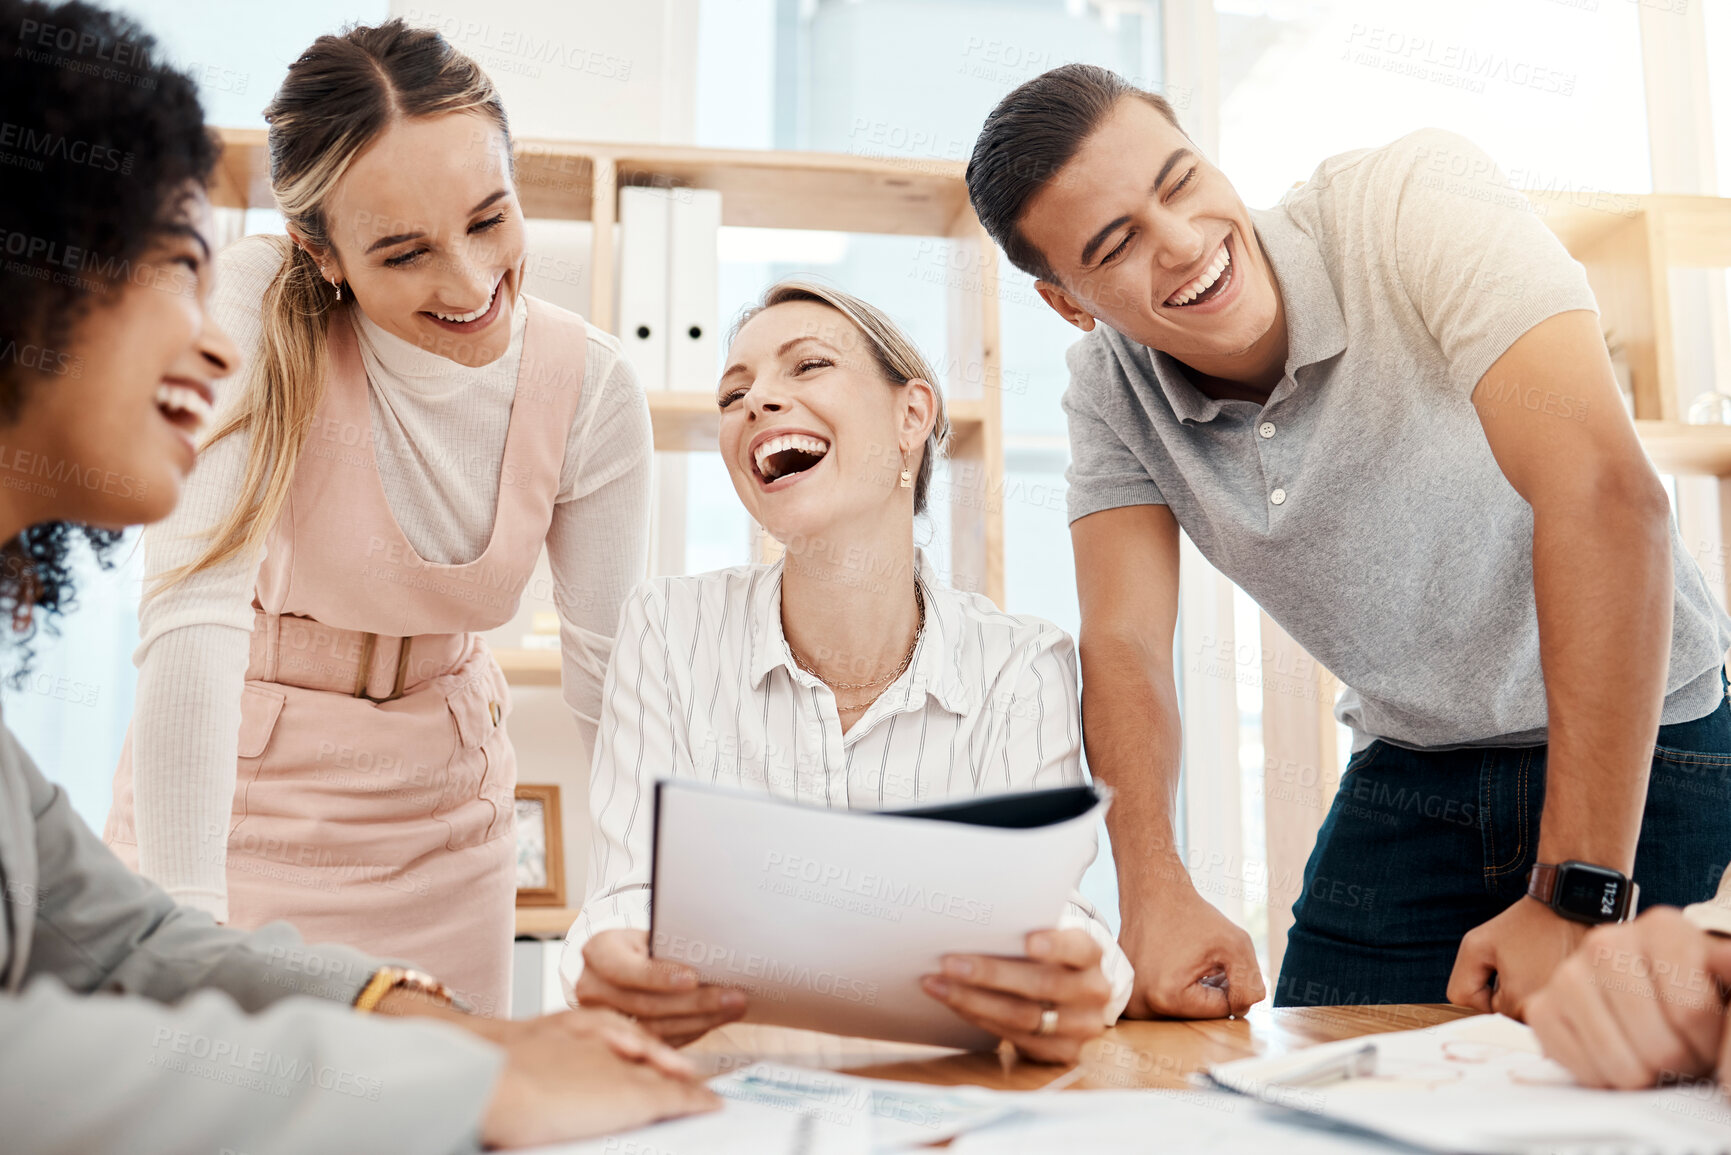 Buy stock photo Meeting, documents and team happy with success of kpi target goals, global marketing strategy or teamwork. Manager, leader or diversity business people with data laugh over joke or sales achievement